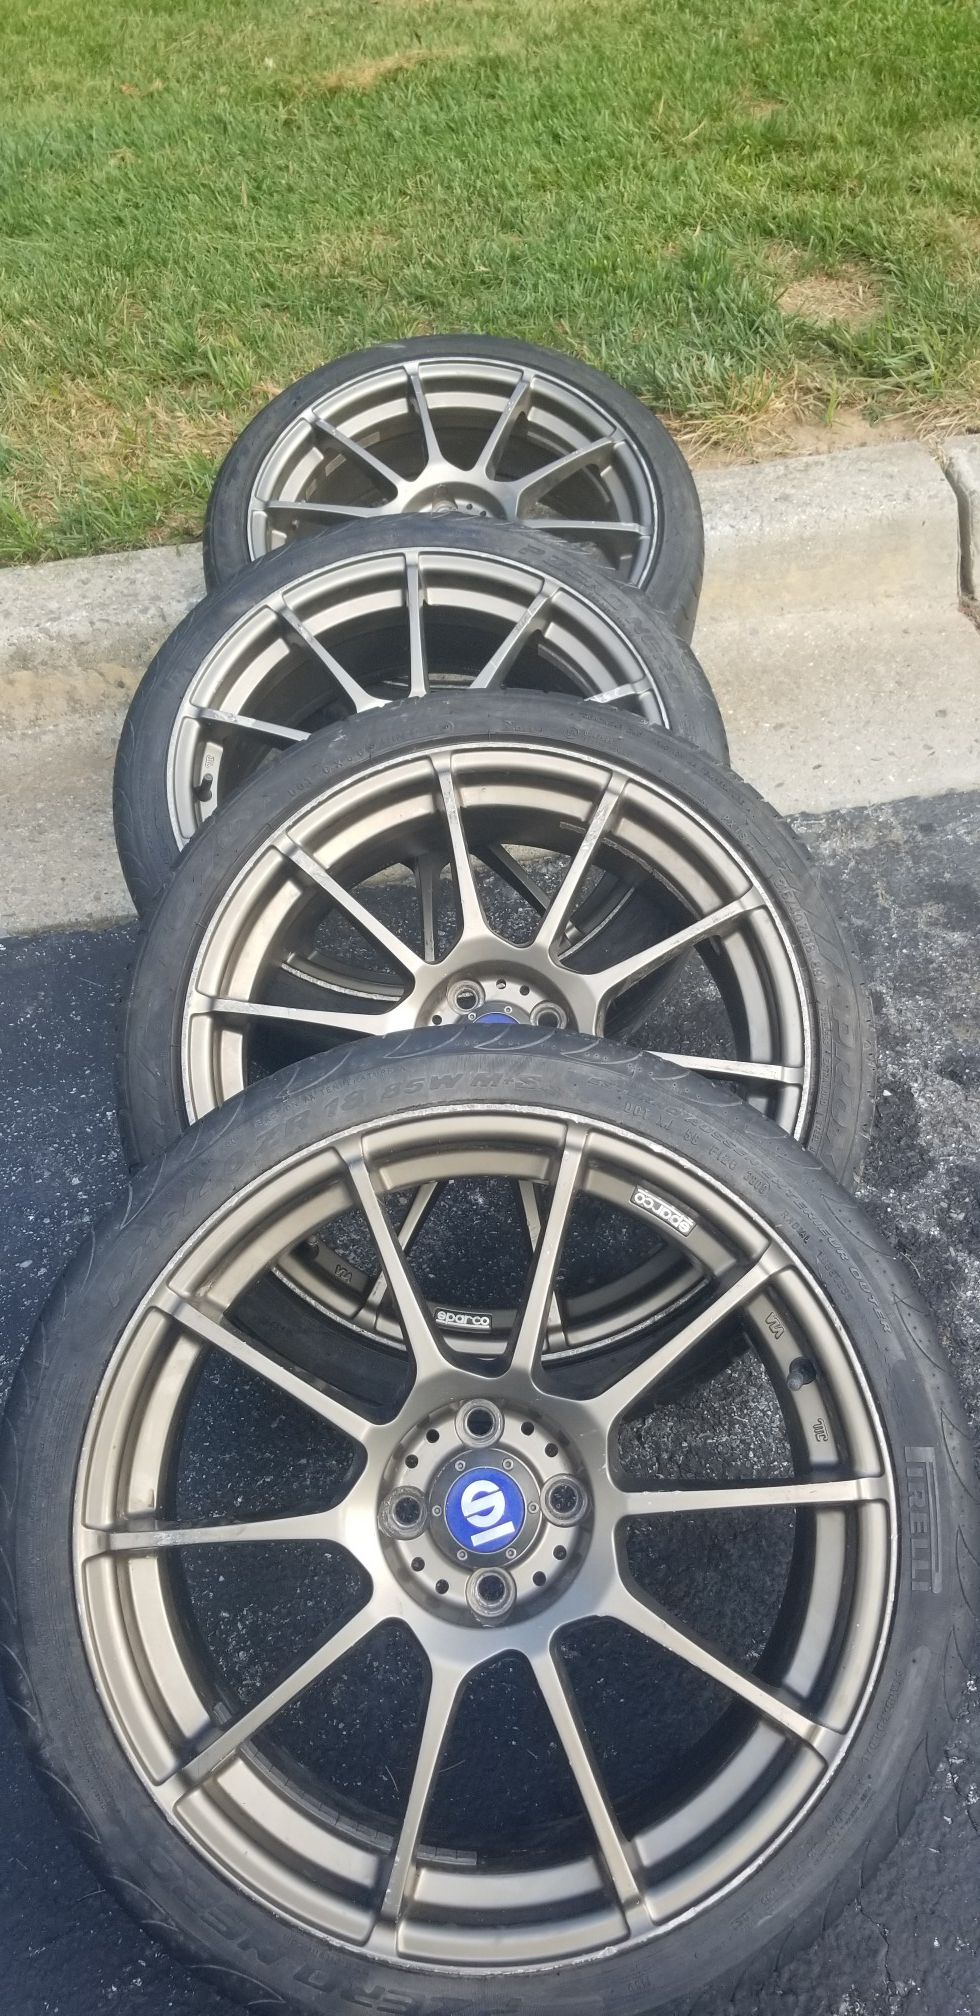 4 18in 4x100 sparco gold wheels rims tires 215 40 zr18 tires